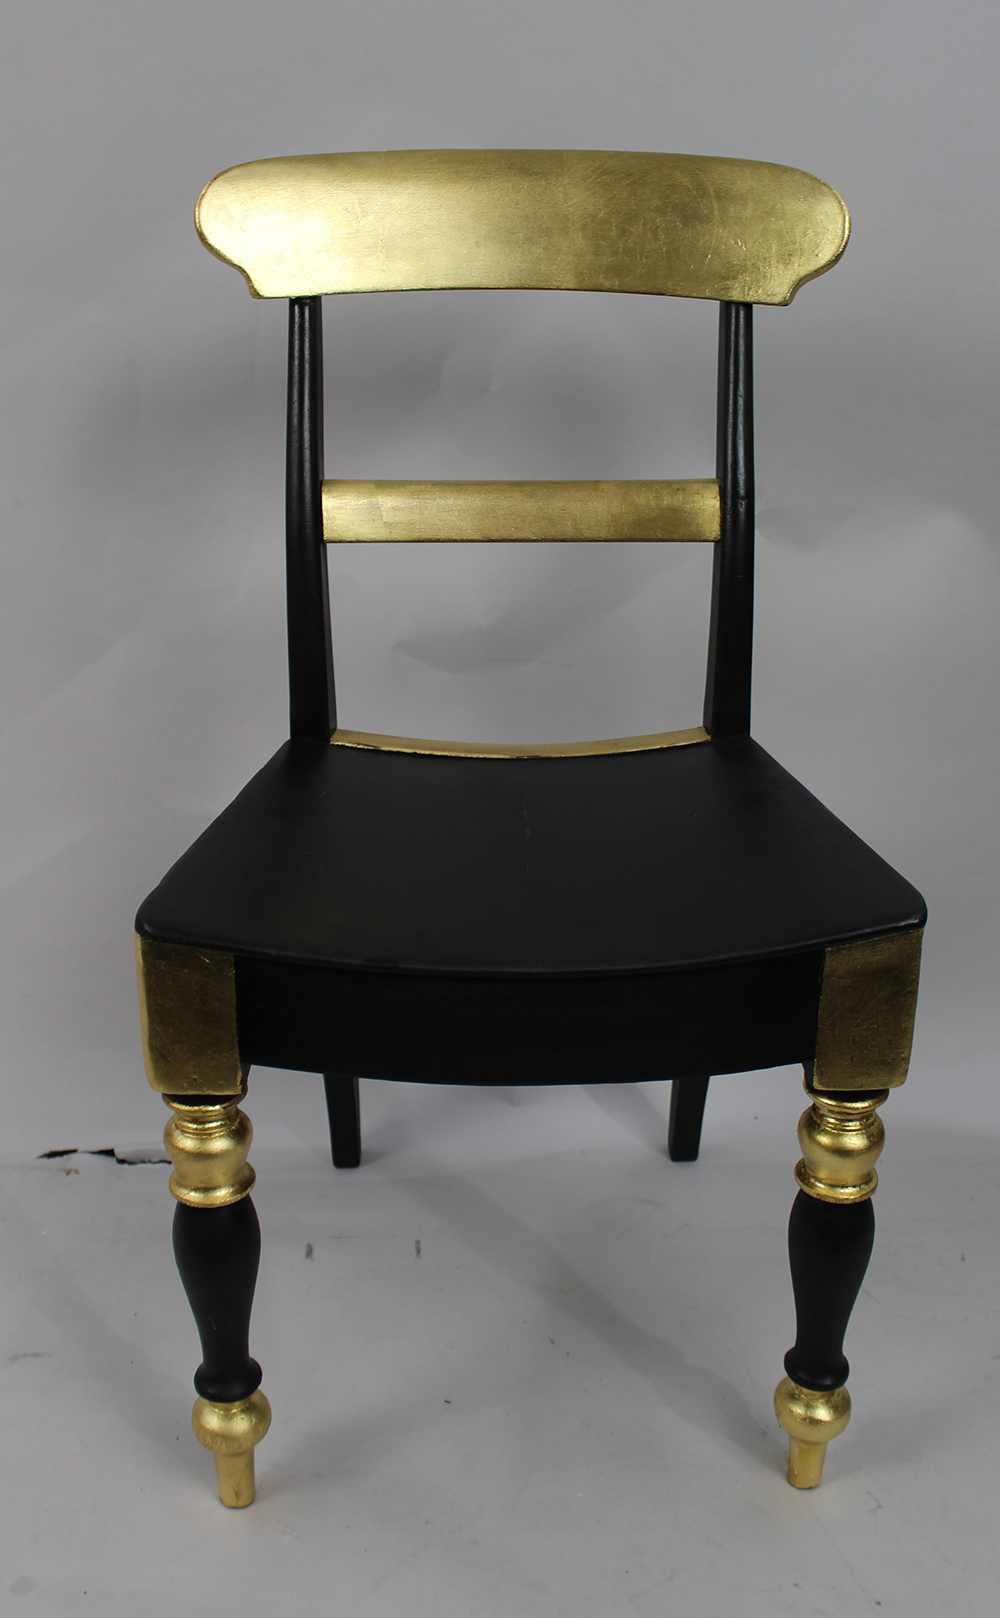 Painted Black & Gilt Desk Occasional Chair - Image 2 of 4